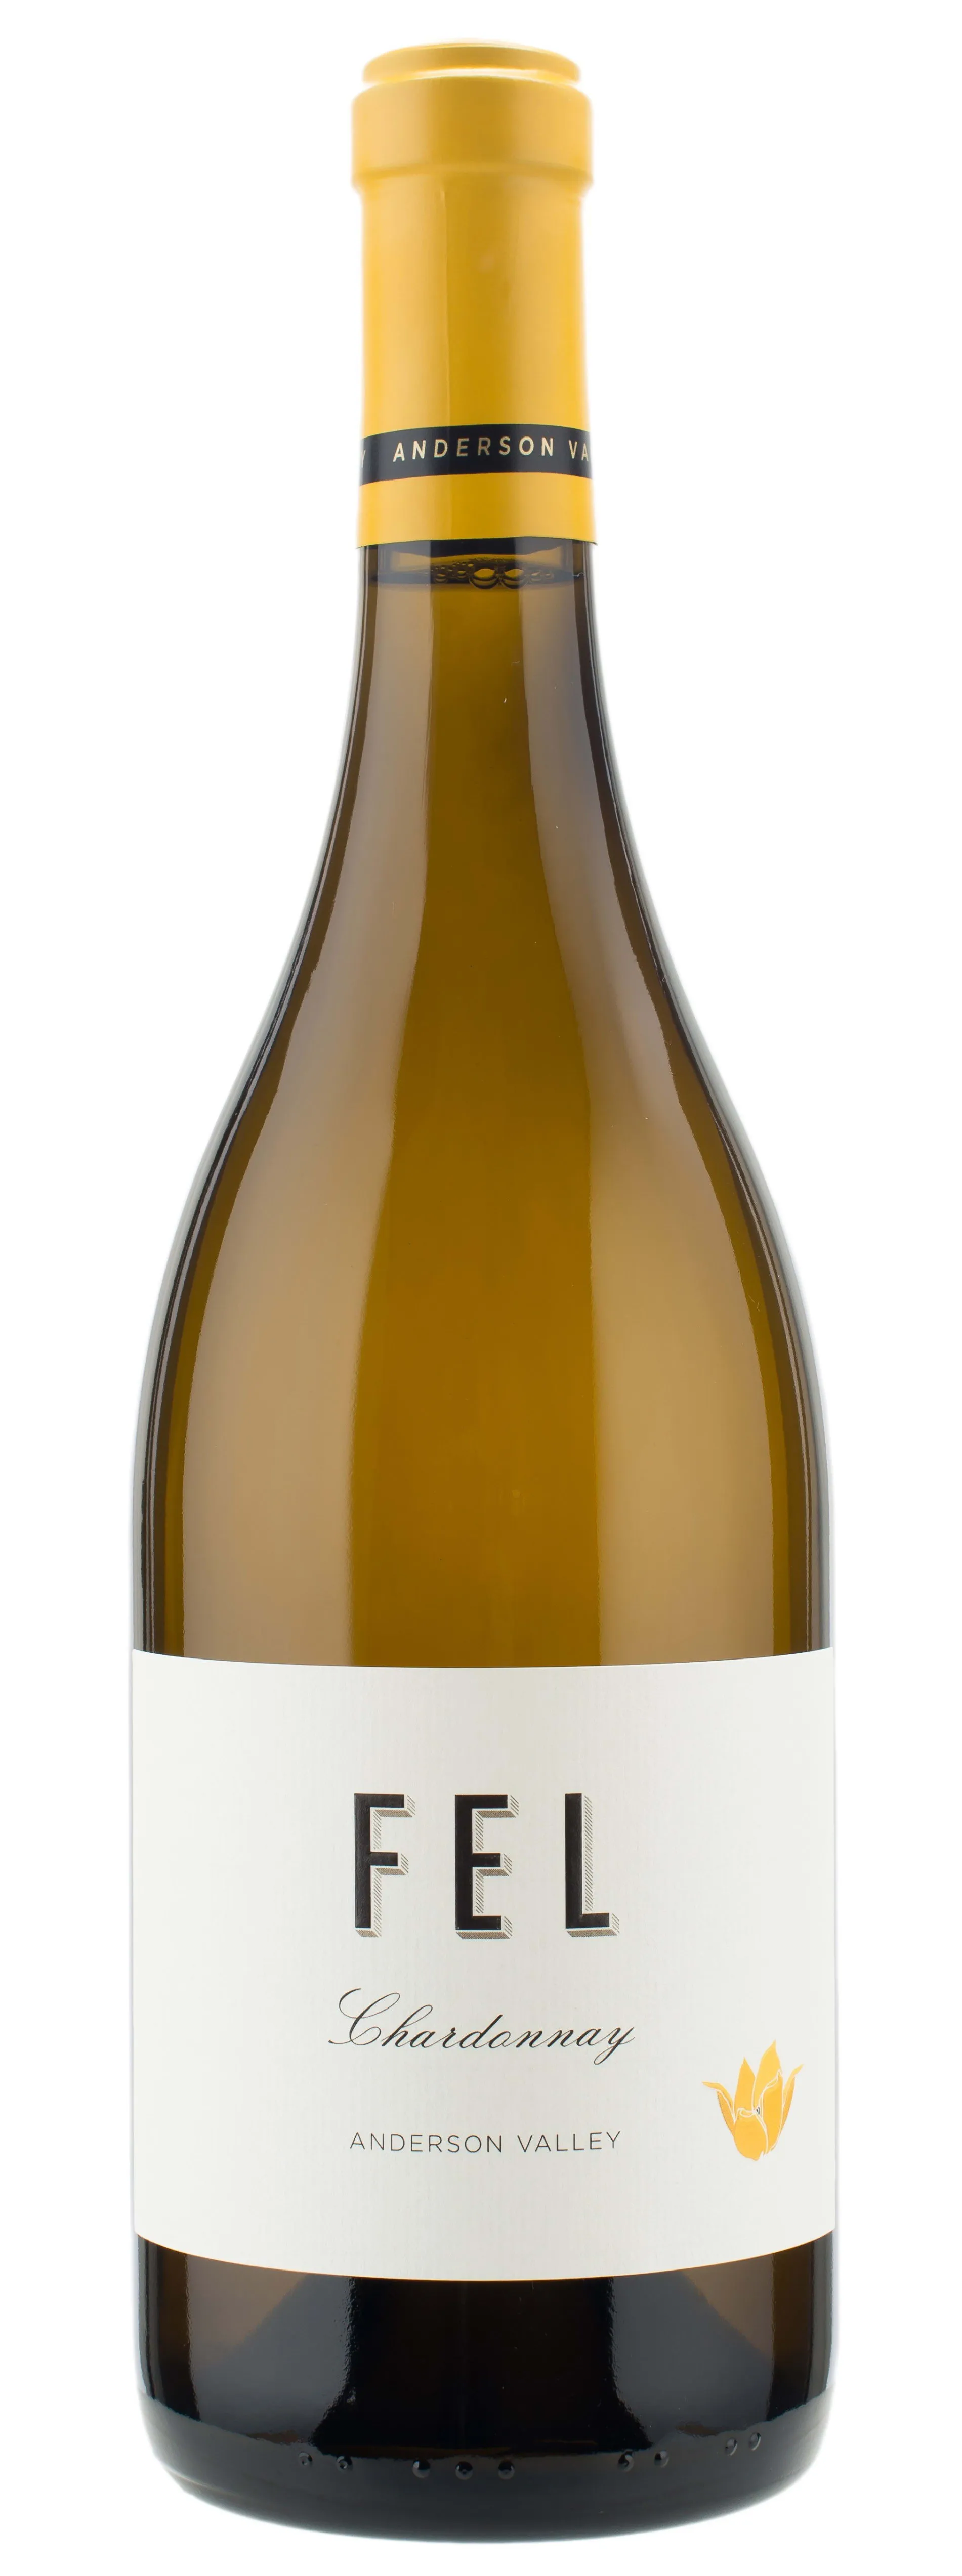 Bottle of FEL Chardonnay from search results